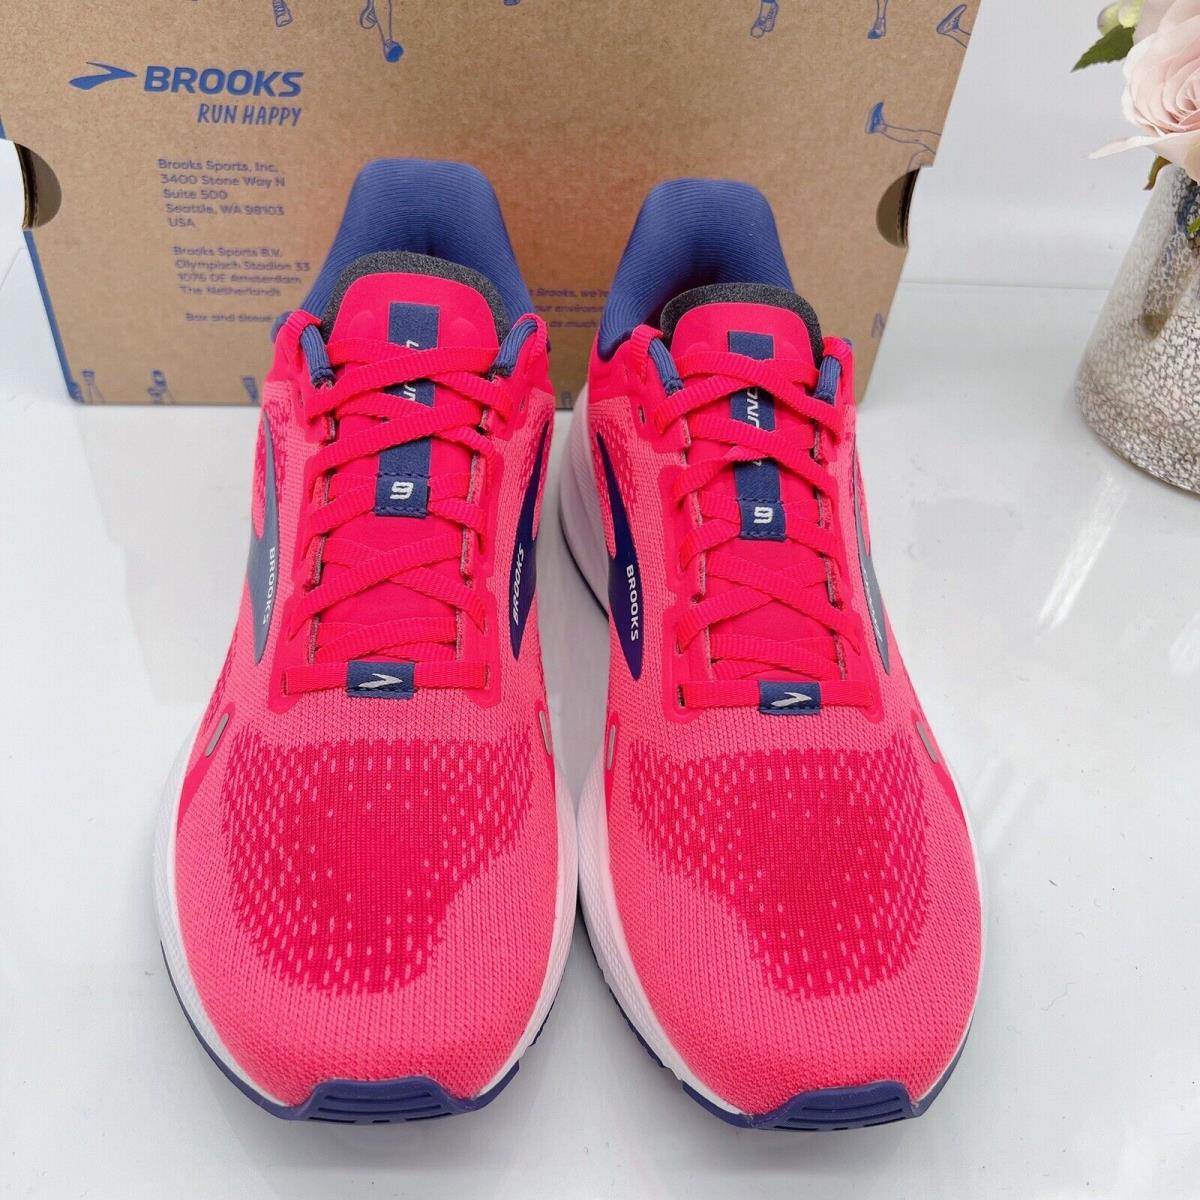 Brooks shoes Launch - Pink 2